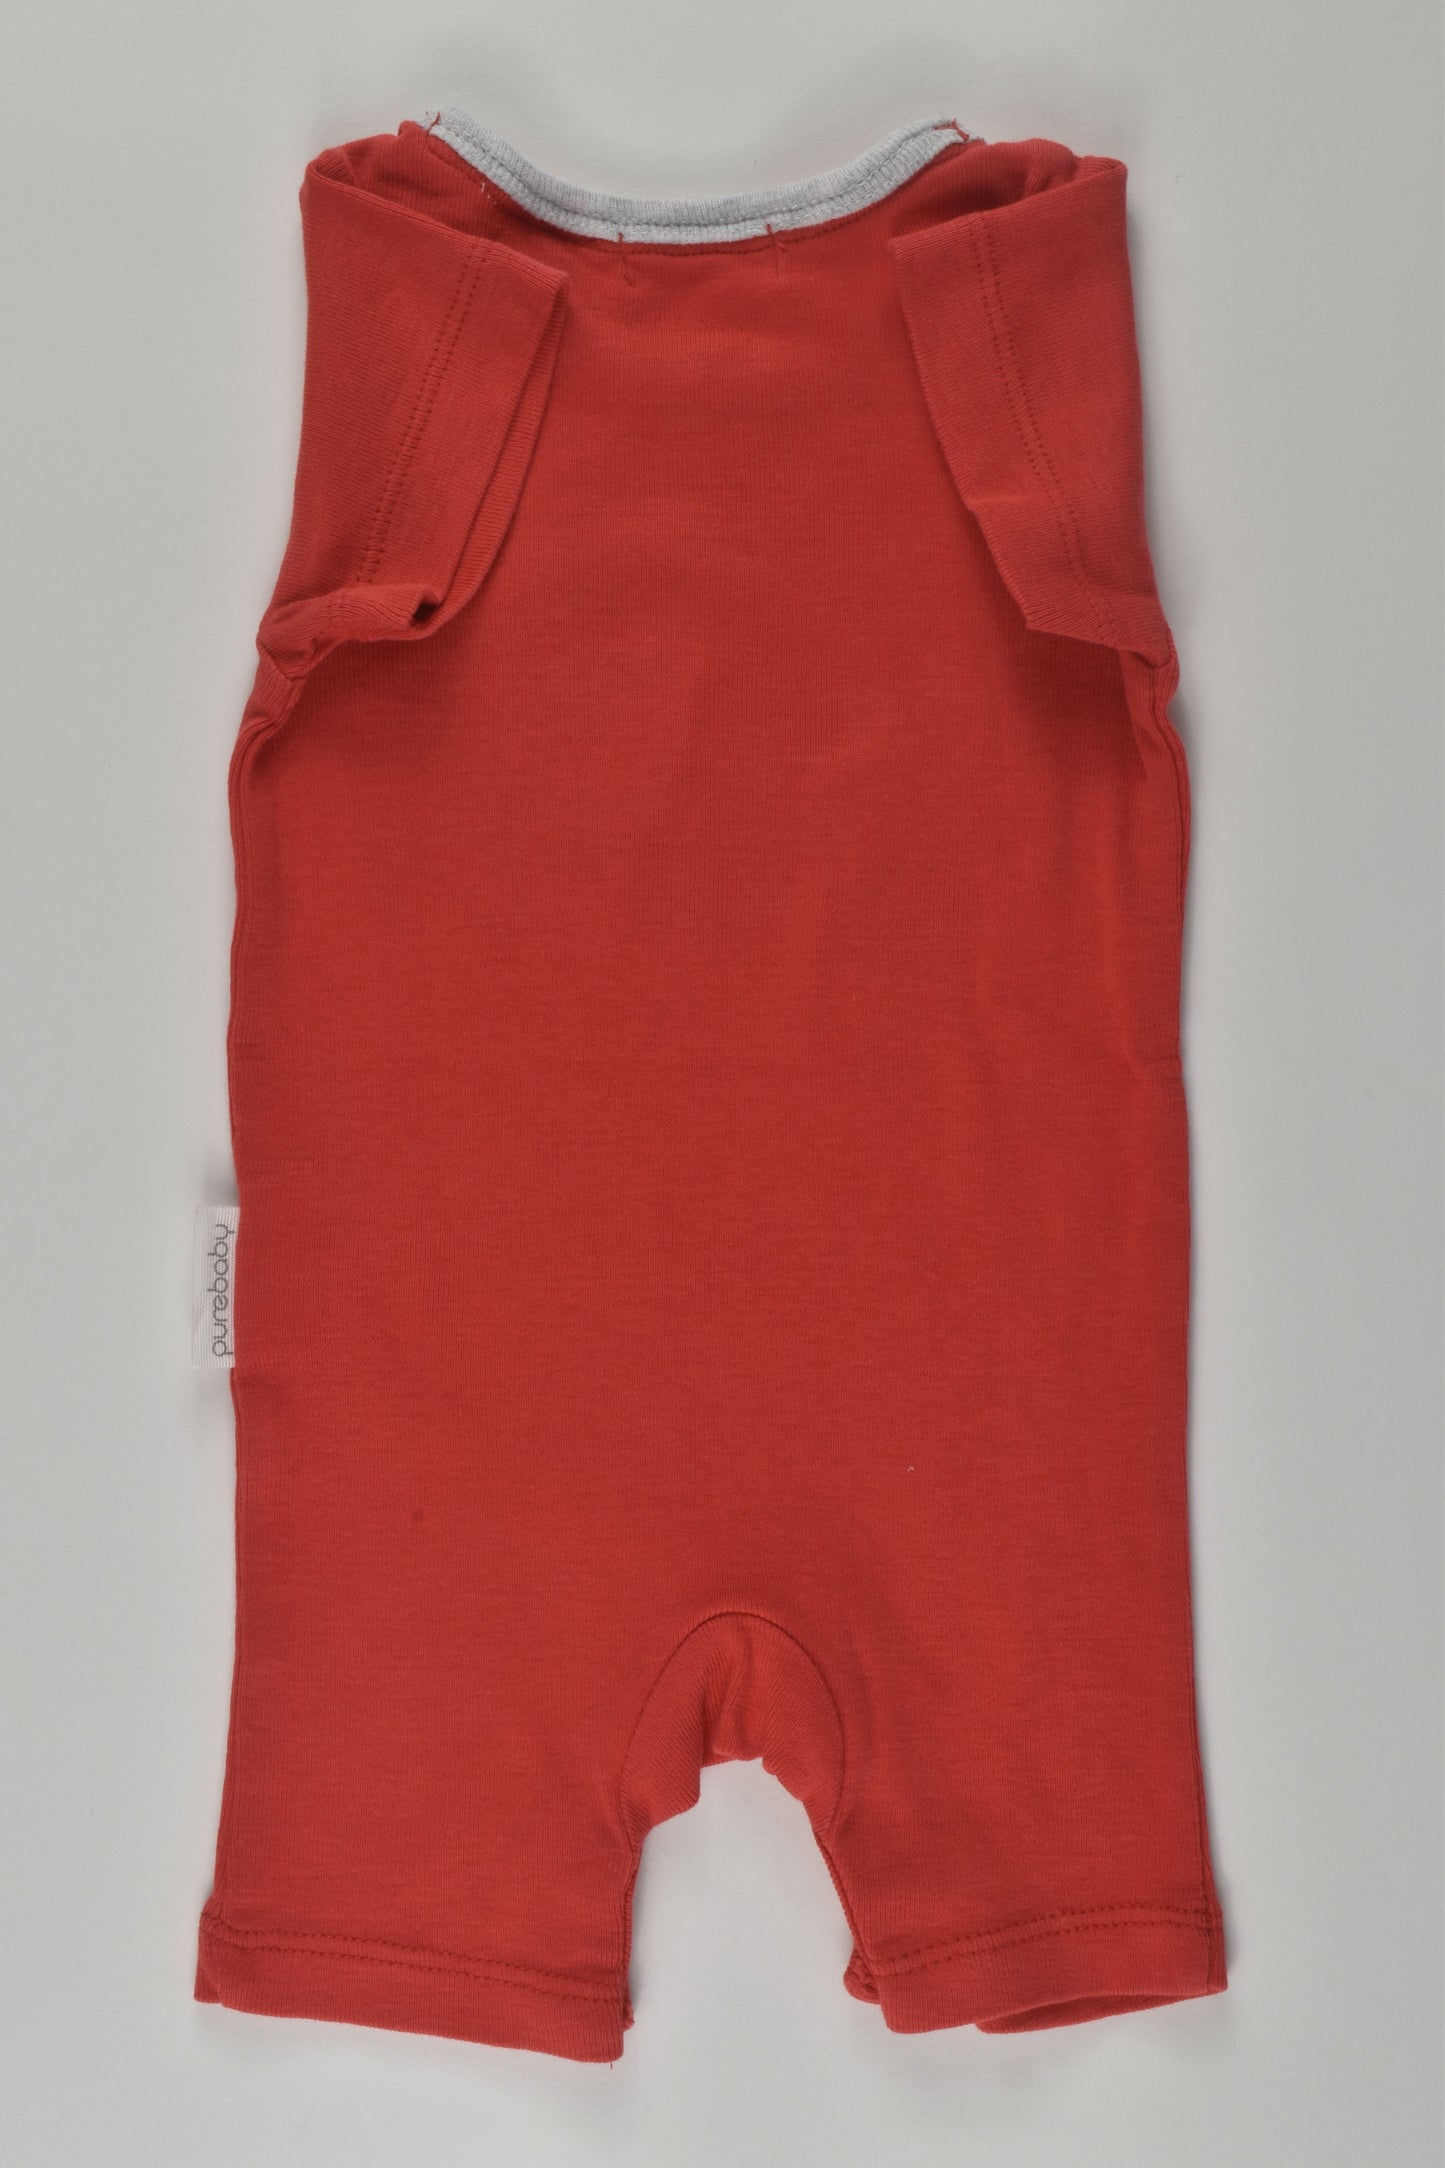 Purebaby Size 000 'Special Delivery' Romper